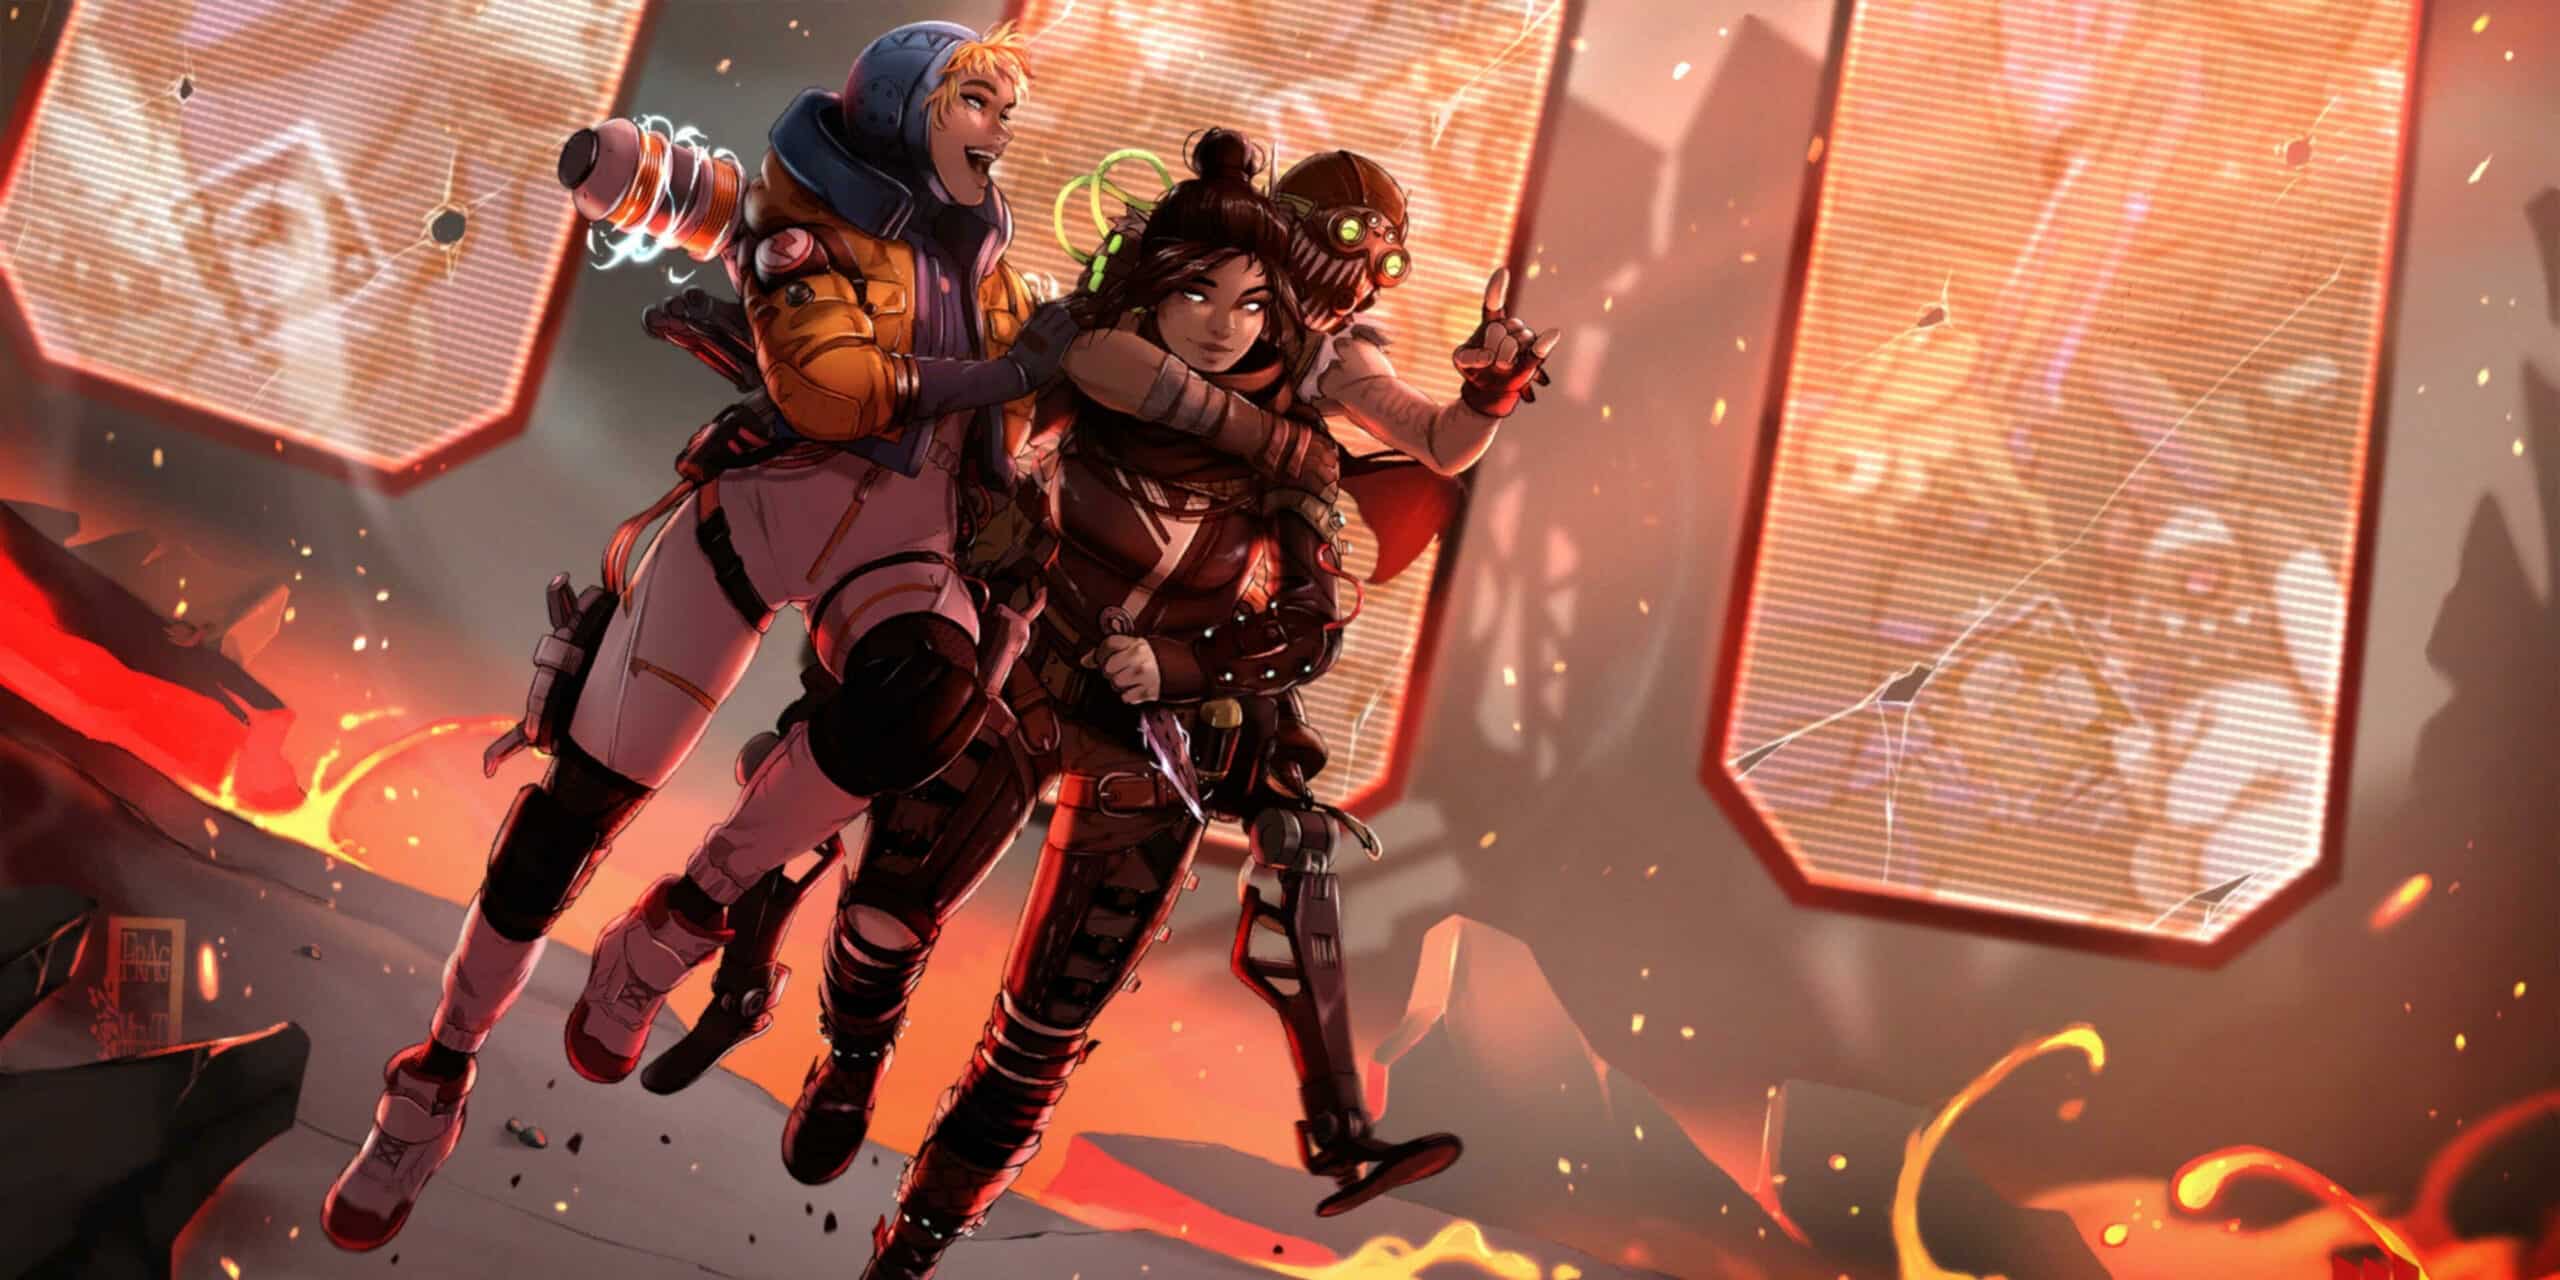 Respawn to Sunset Apex Legends Mobile Without Refunds